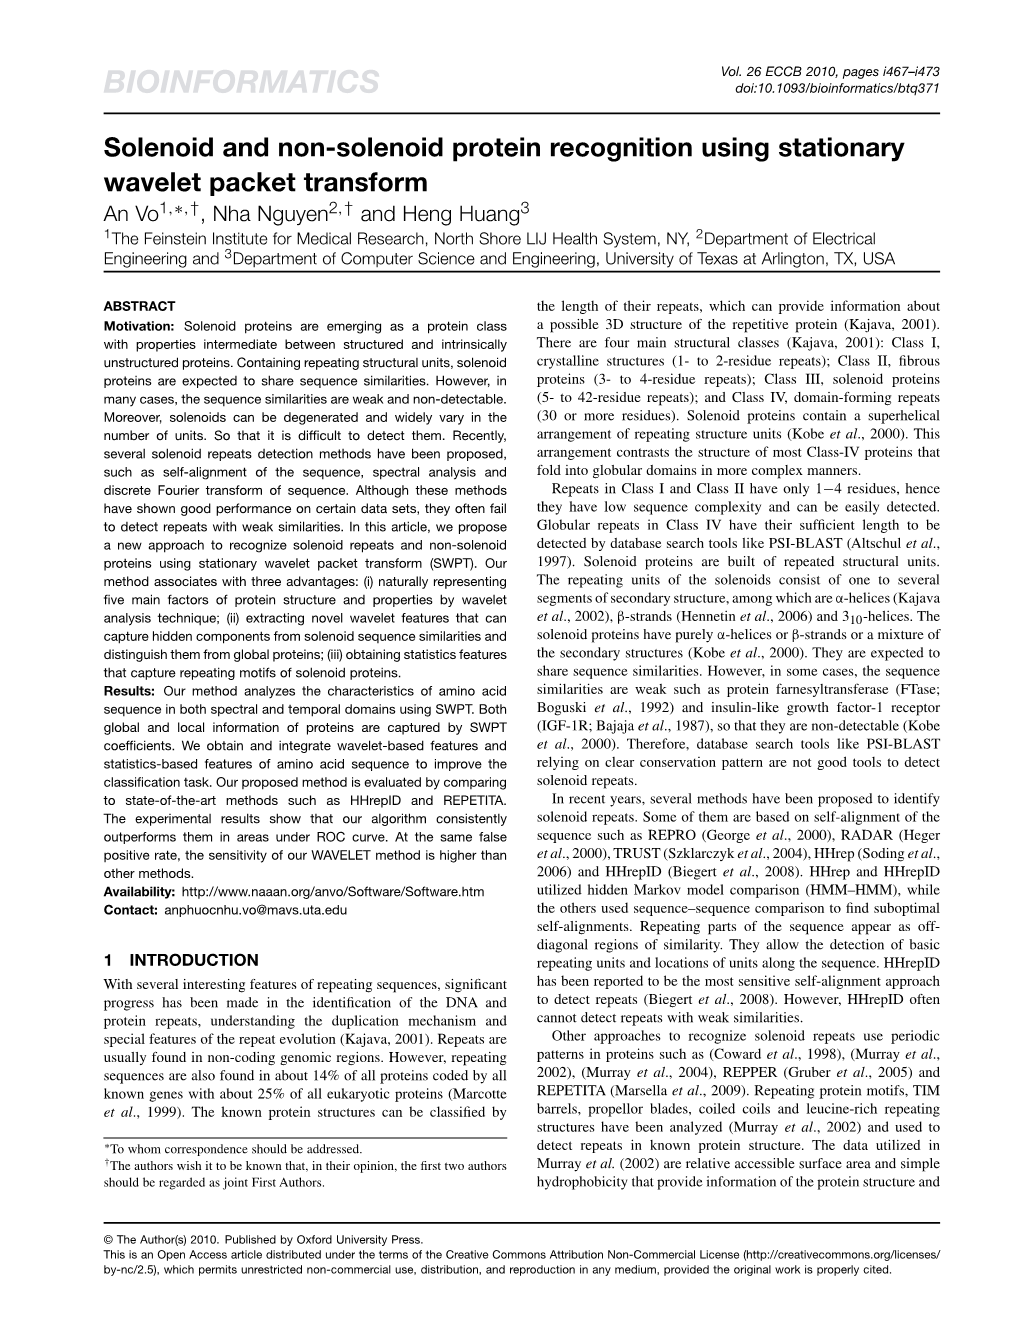 Solenoid and Non-Solenoid Protein Recognition Using Stationary Wavelet